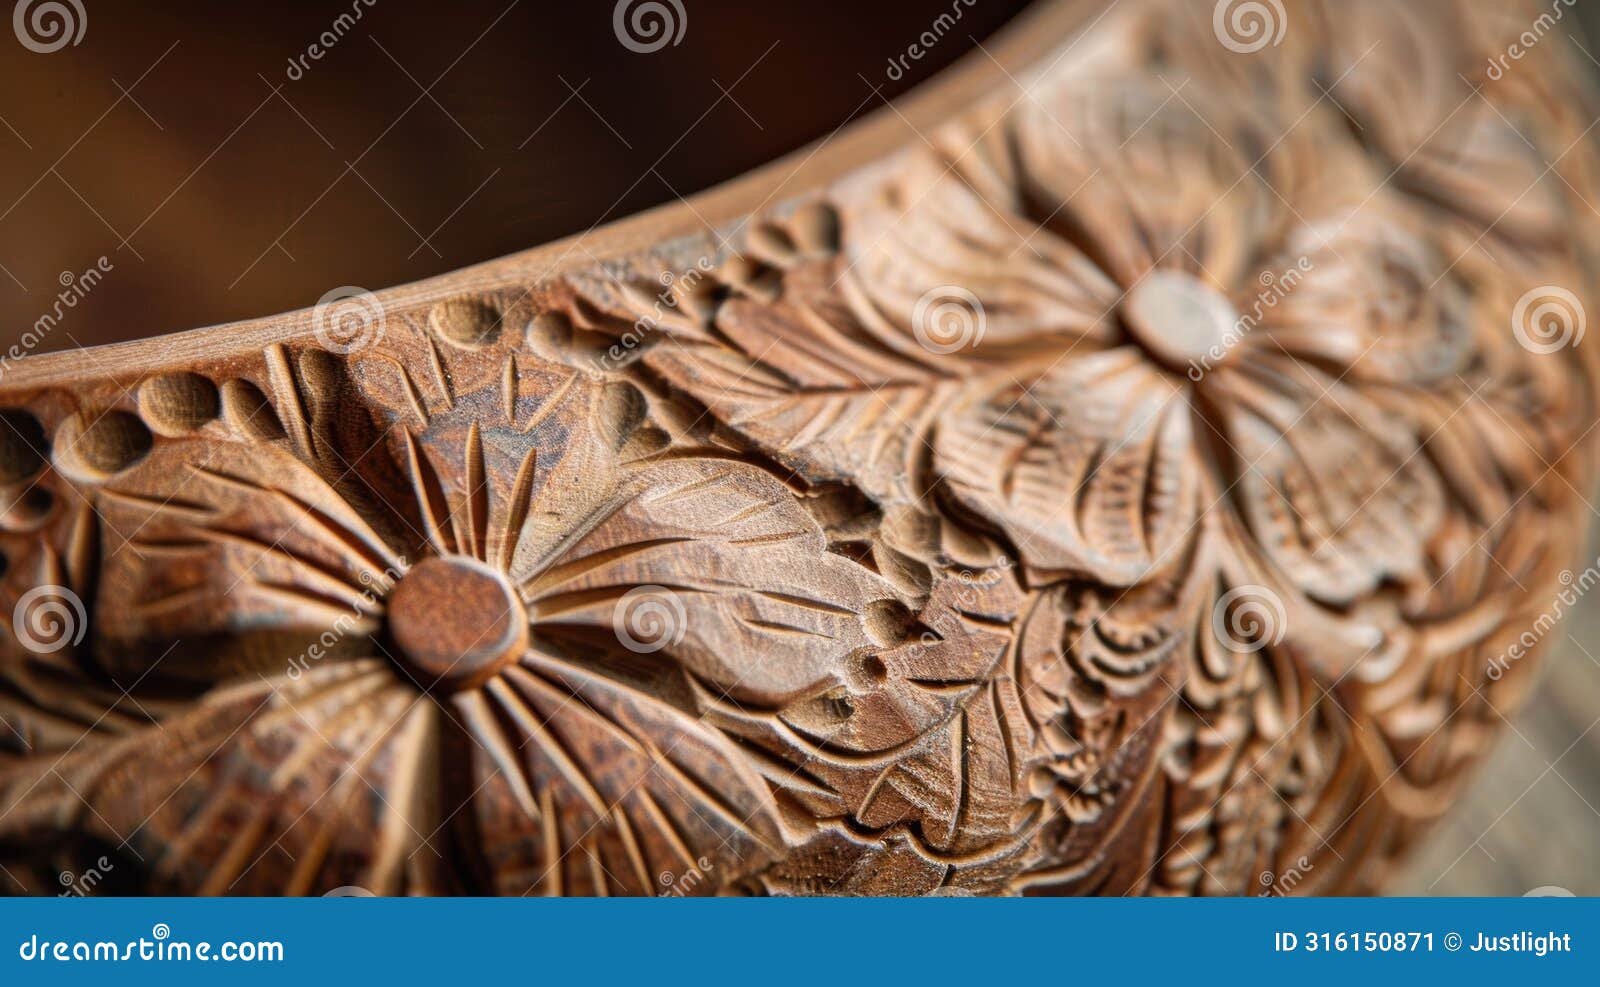 an engraved clay bowl featuring a beautiful floral  that looks almost threedimensional due to the engraving